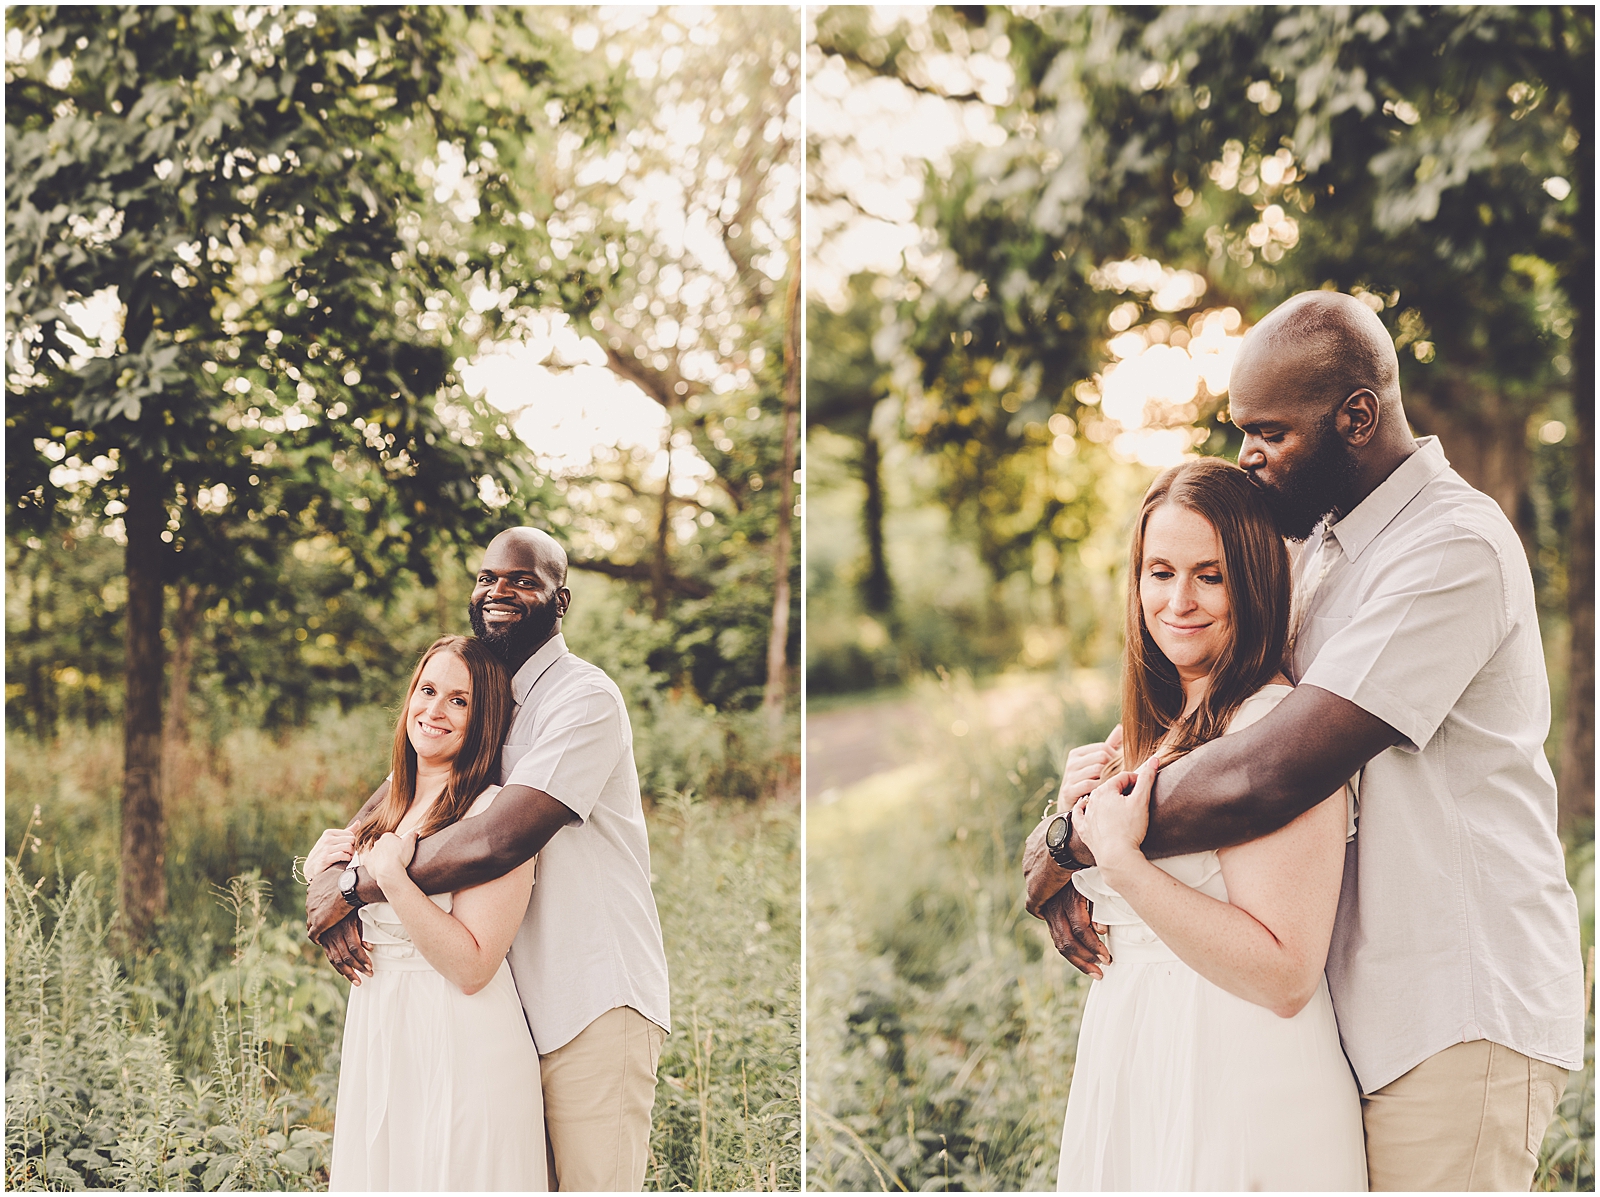 Emma and JeMarcus's engagement photos at Hickory Creek in Mokena with Chicagoland wedding photographer Kara Evans Photographer.